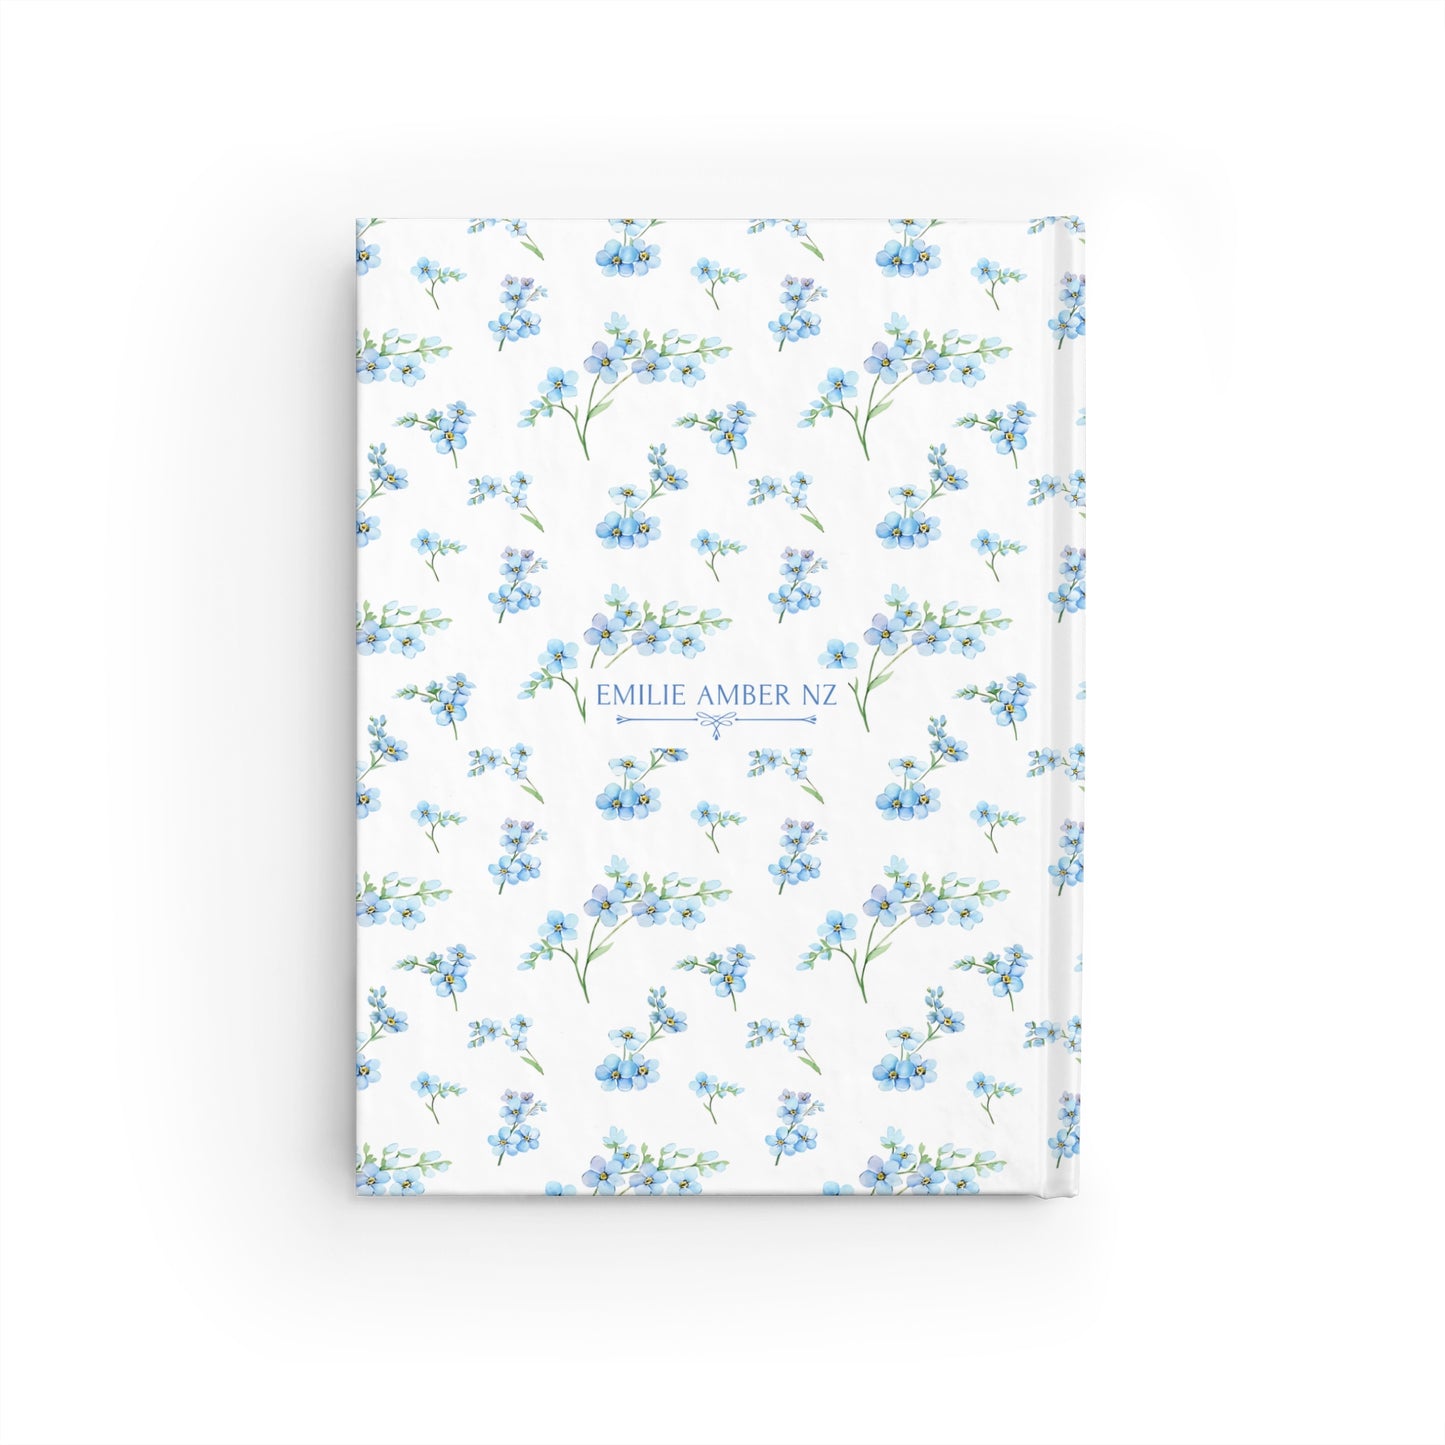 Forget-Me-Not Writing Journal - Ruled Line